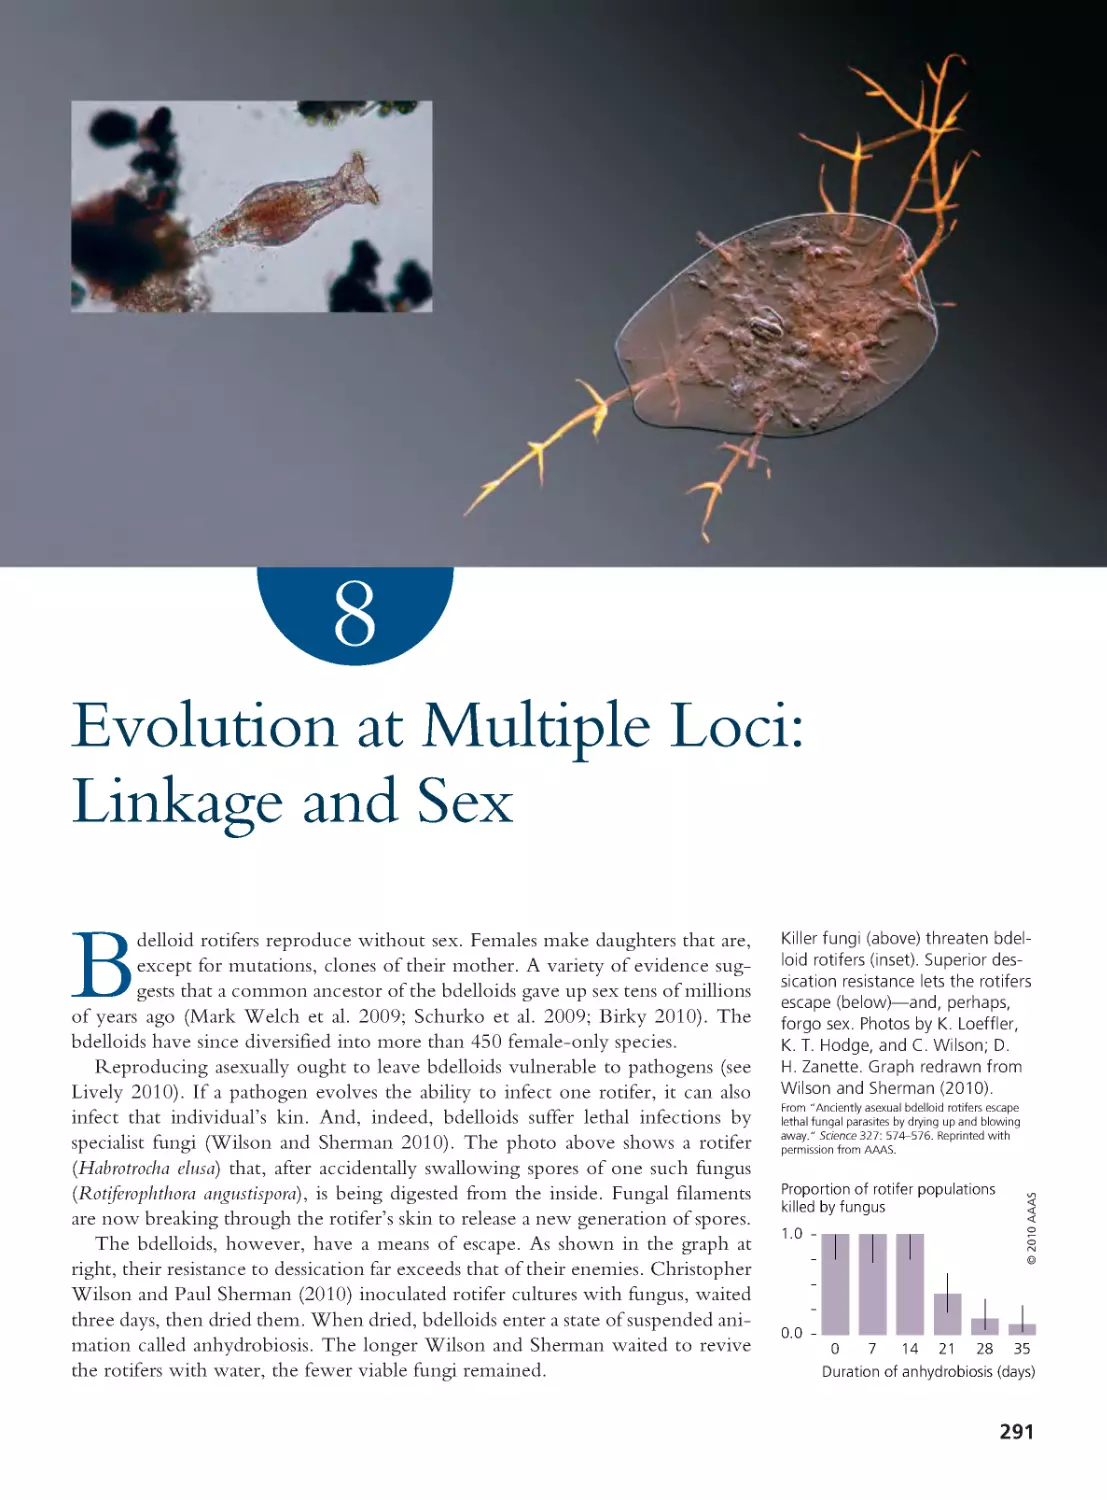 CHAPTER 8 Evolution at Multiple Loci: Linkage and Sex